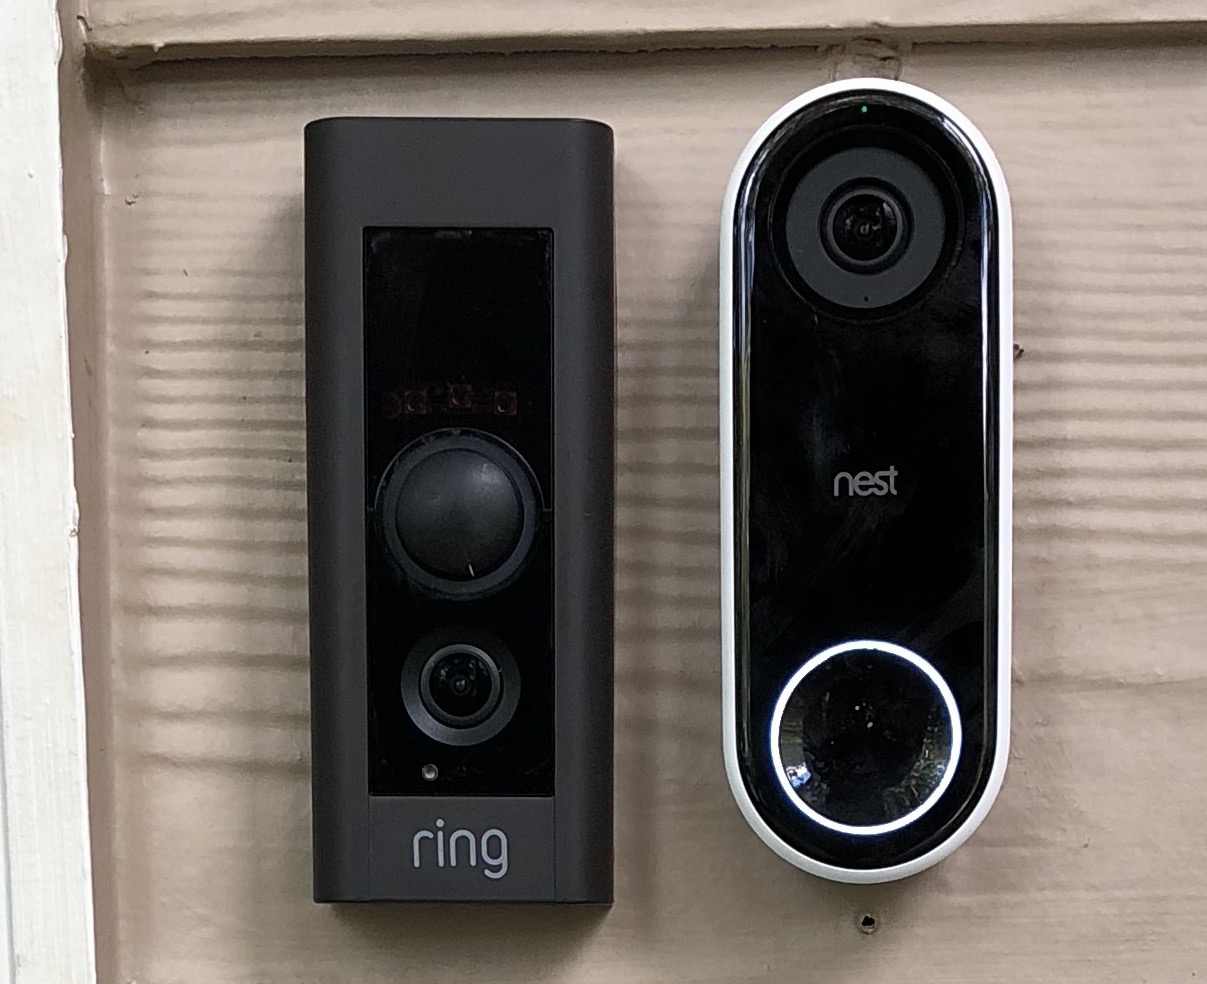 ring doorbell works with nest